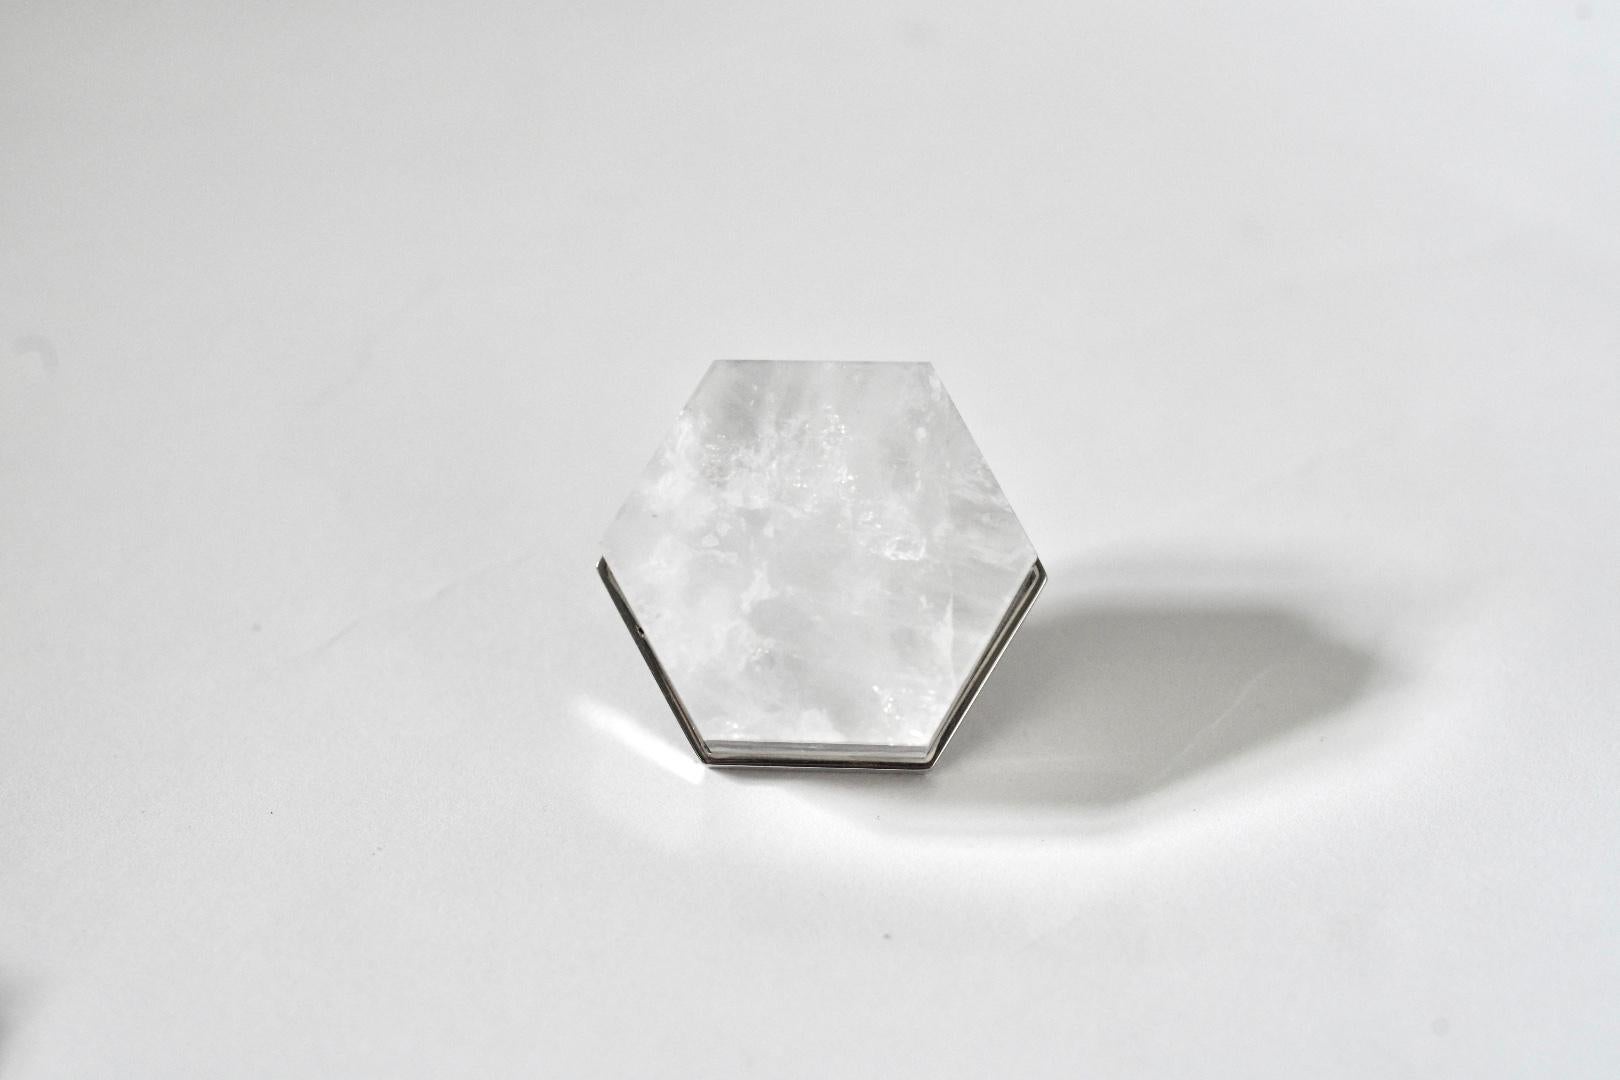 Hexagon form rock crystal quartz knob with nickel plating base. Created by Phoenix Gallery, NYC.